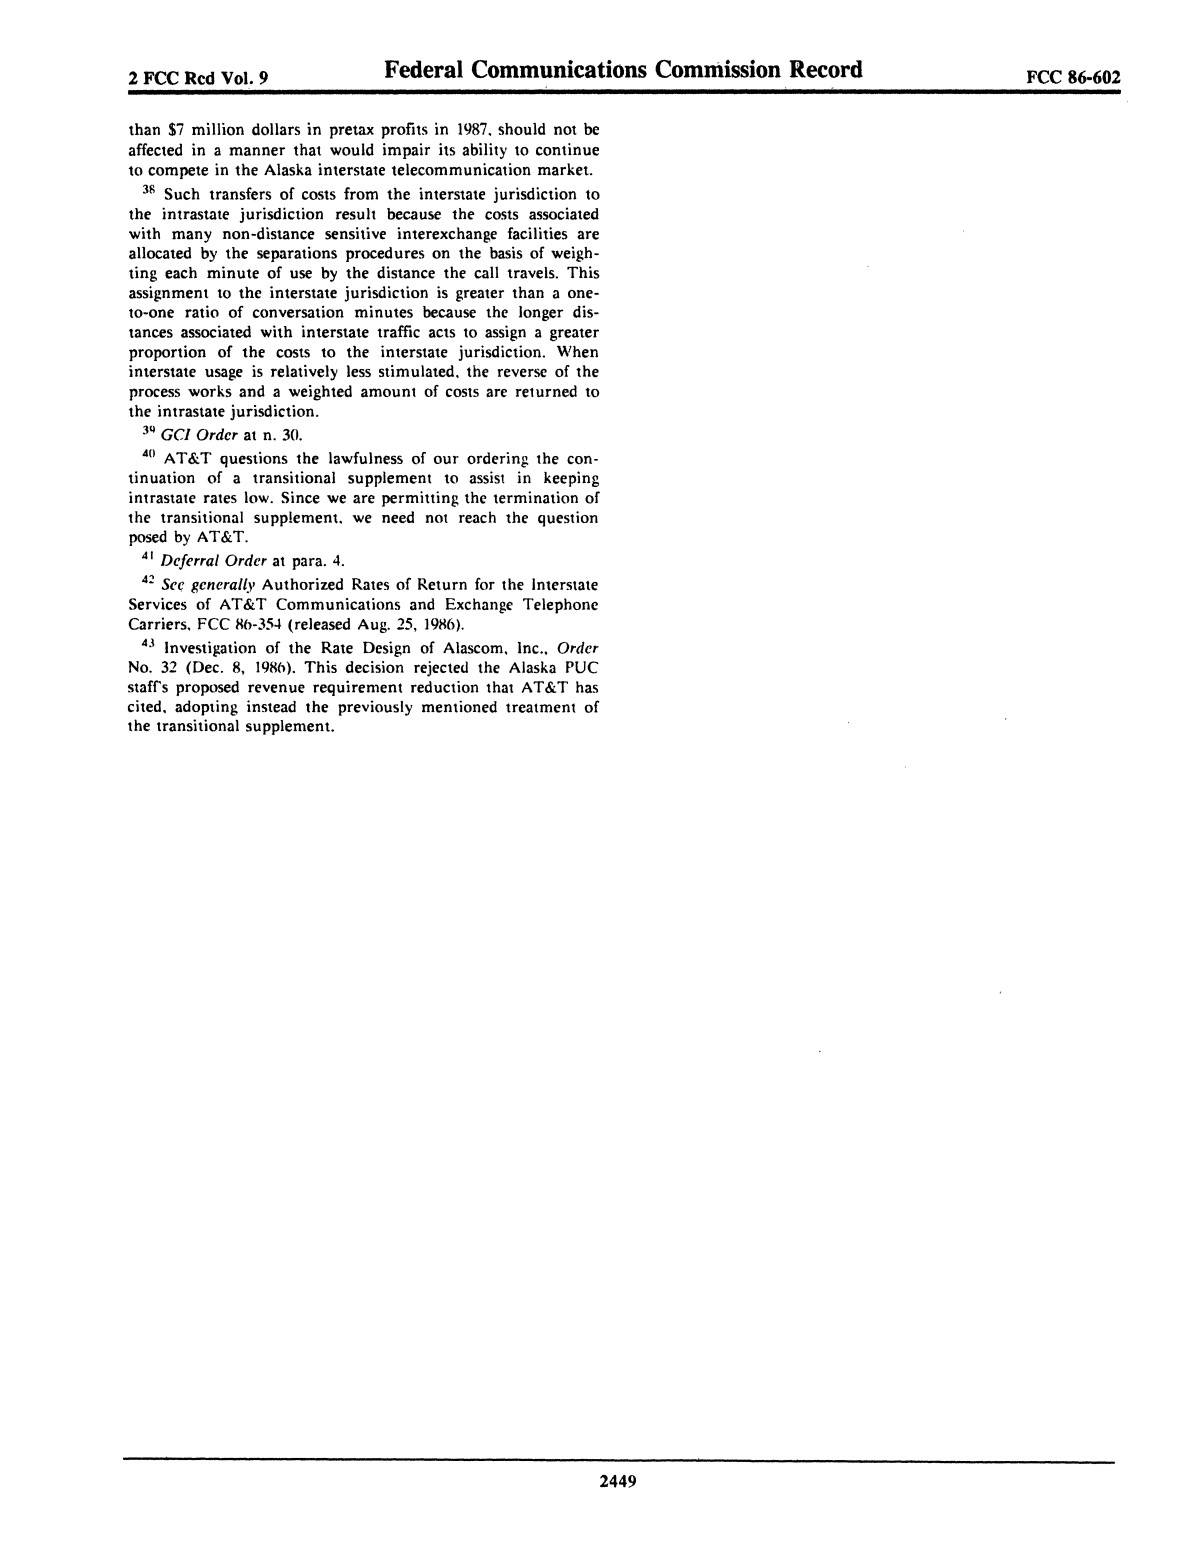 FCC Record, Volume 2, No. 9, Pages 2437 to 2750, April 27 - May 8, 1987
                                                
                                                    2449
                                                